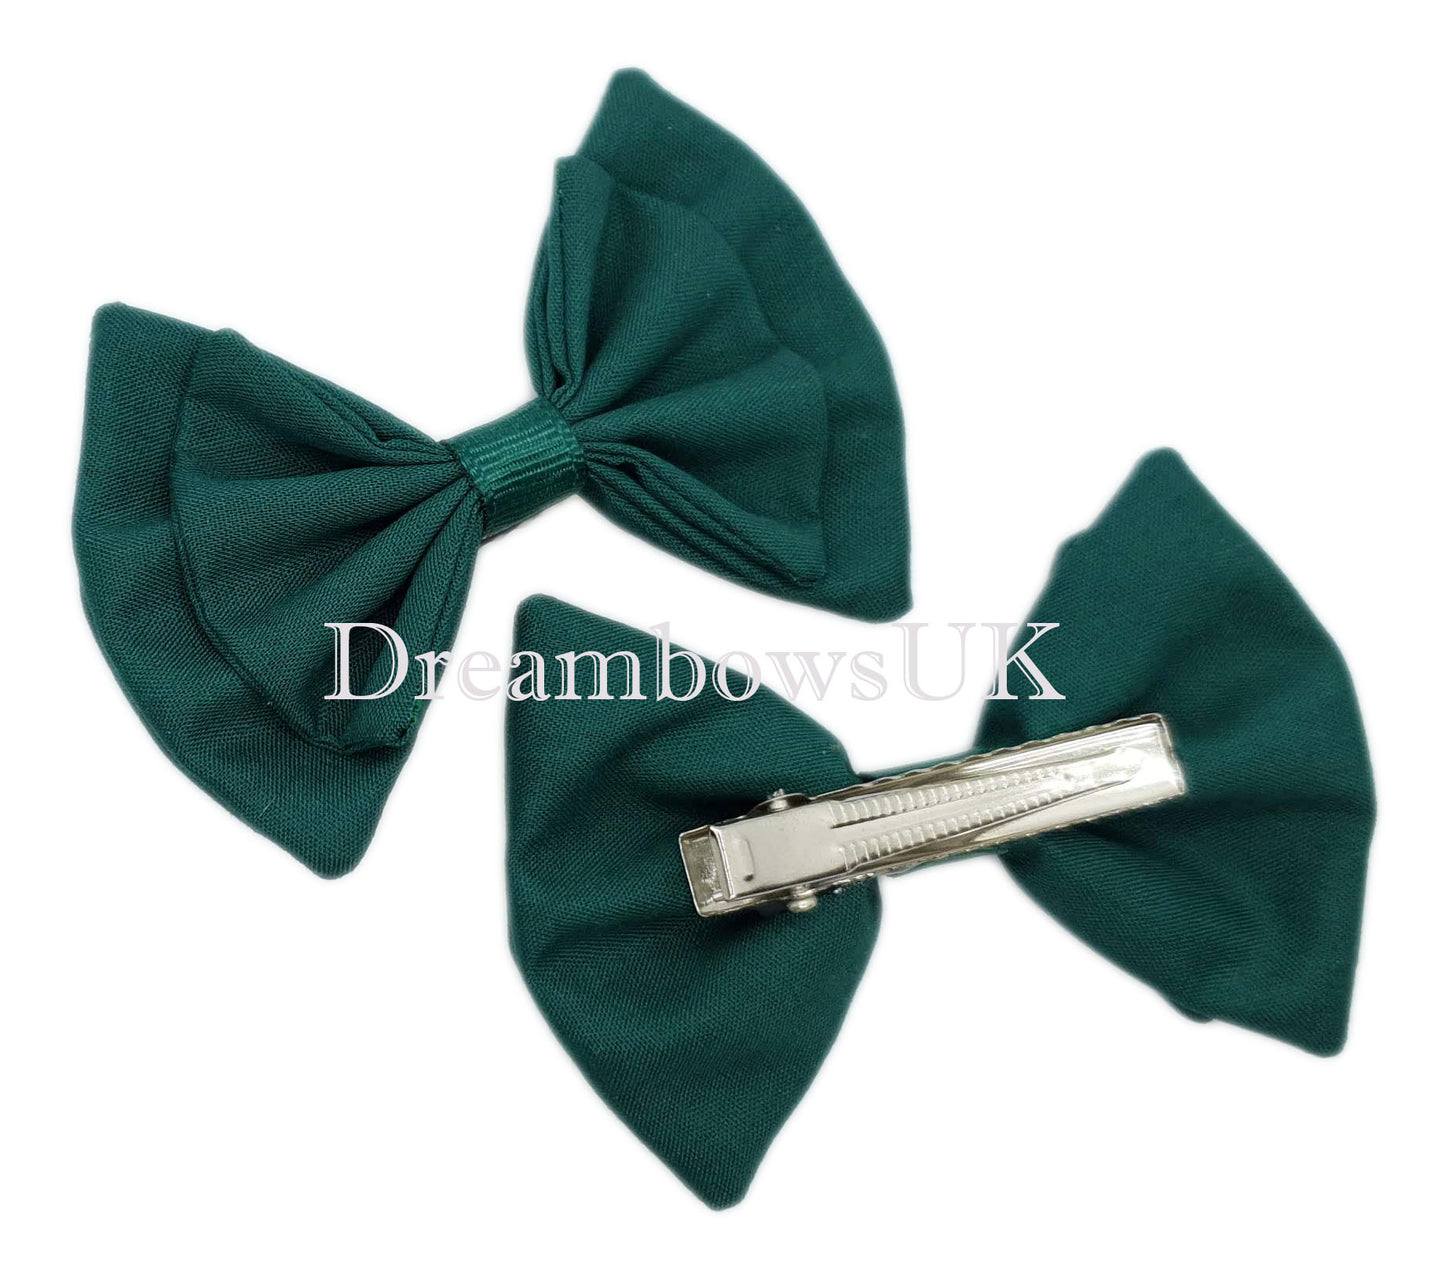 Girls matching hair bows for school uniforms